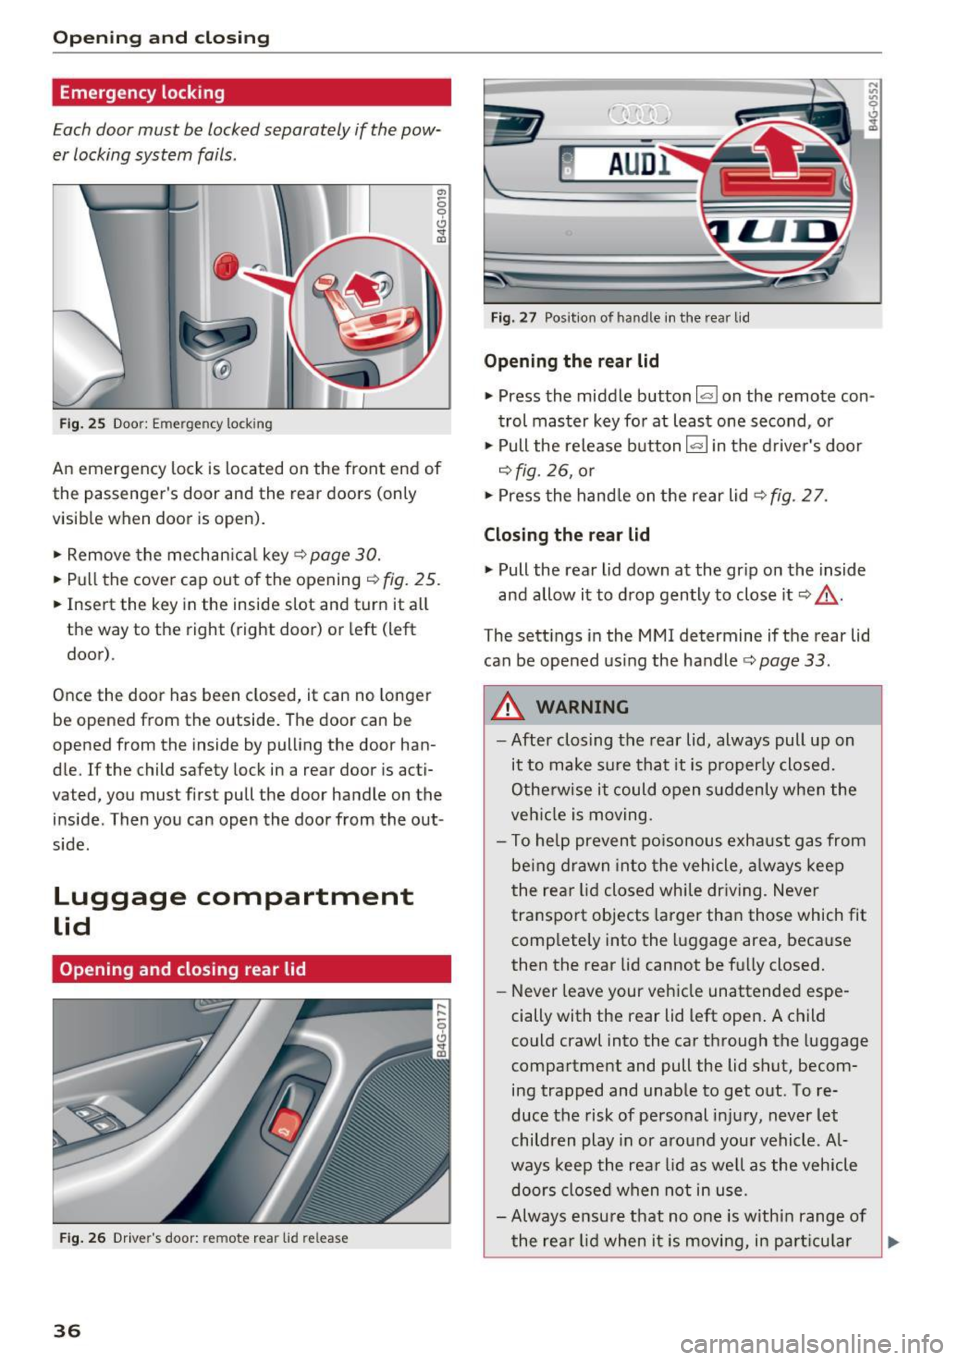 AUDI S6 2016 Owners Guide Opening  and clo sin g 
Emergency  locking 
Each door  must  be locked separately  if  the pow­
er locking  system  fails. 
Fig . 25 Door: Emergency  lock ing 
.,, 
0 9 Cl <t m 
An emergency  lock  i